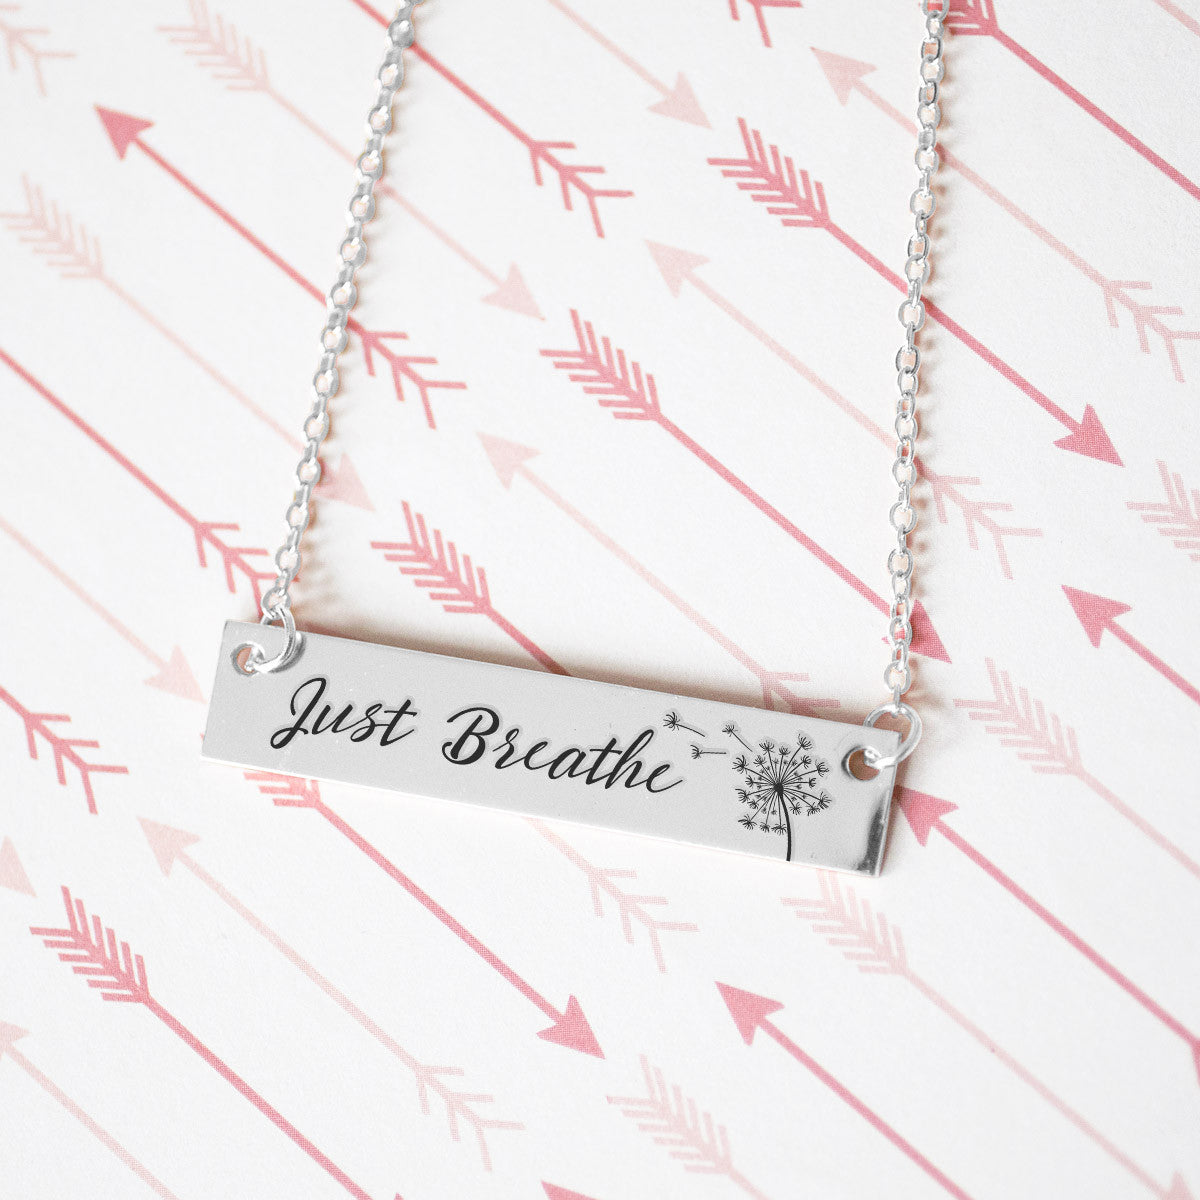 Just Breathe Gold / Silver Bar Necklace - pipercleo.com